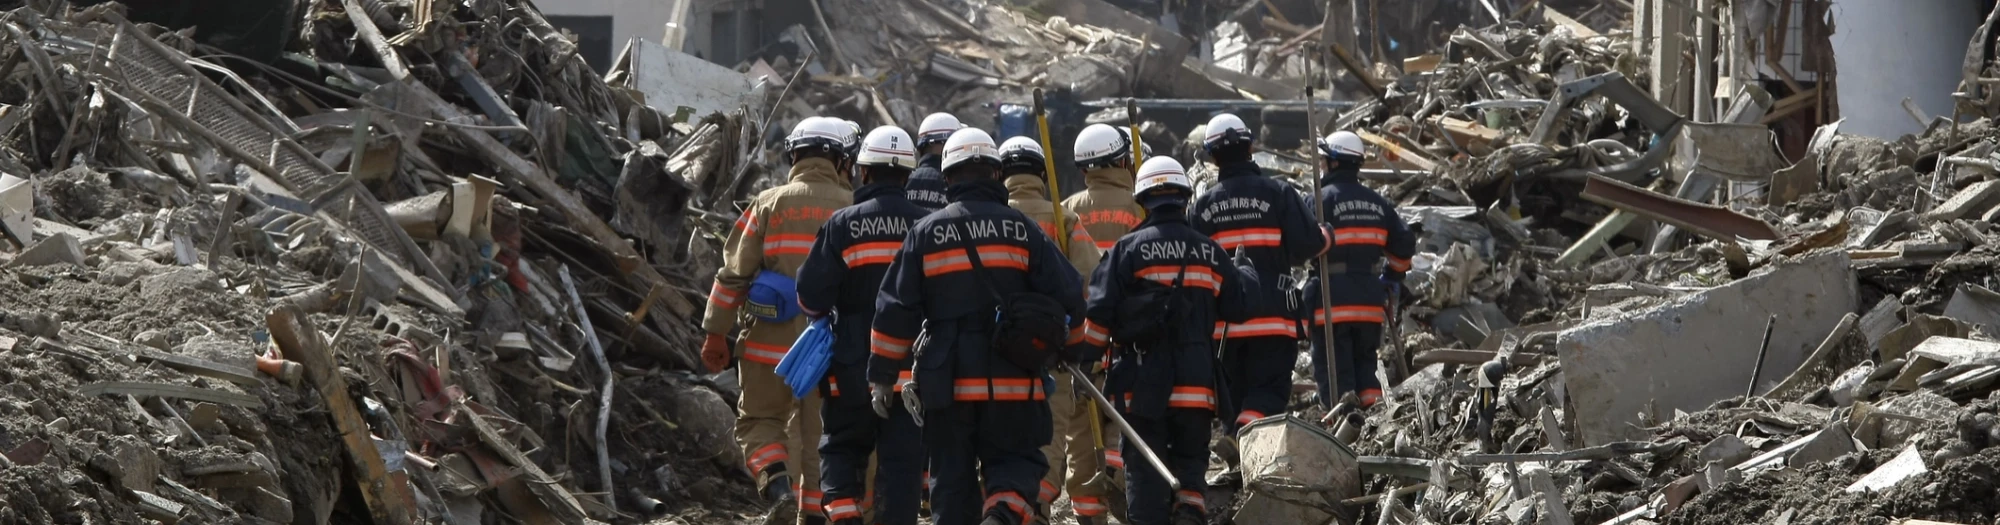 Rescue Team in Japan when hit by earthquake in 2011